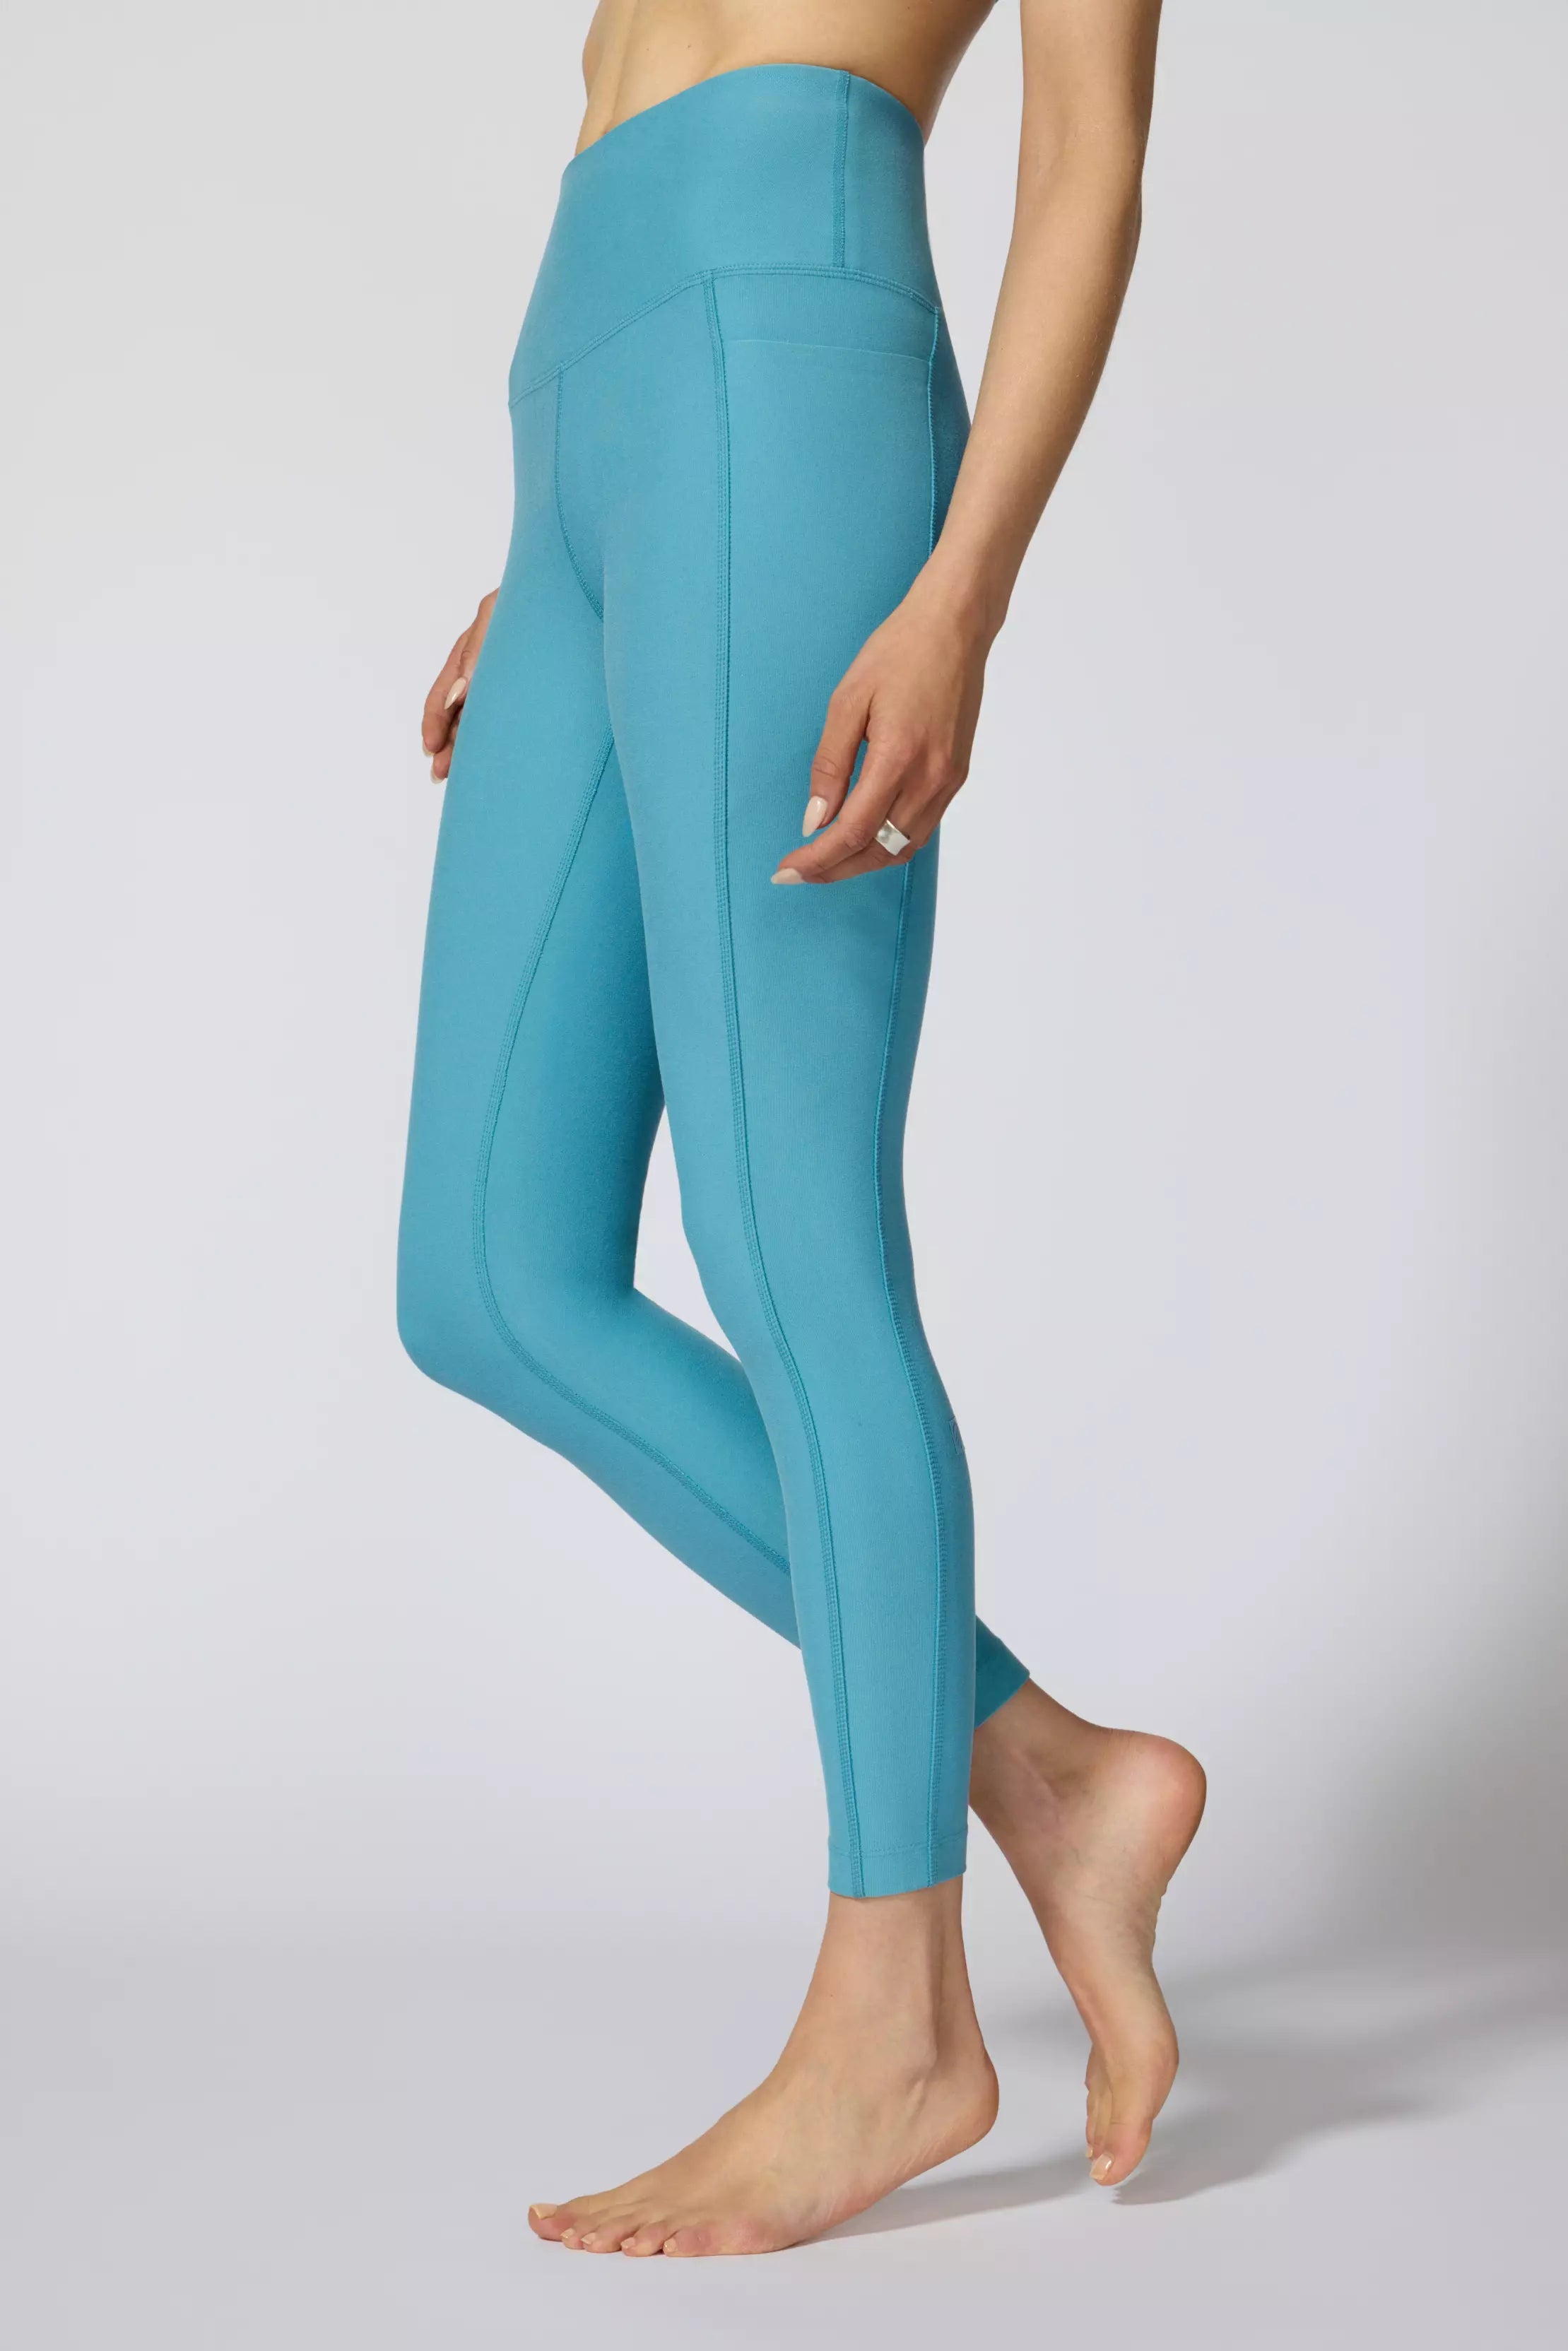 Explore Recycled Polyester High-Waisted Side Pocket Legging 25" Peached